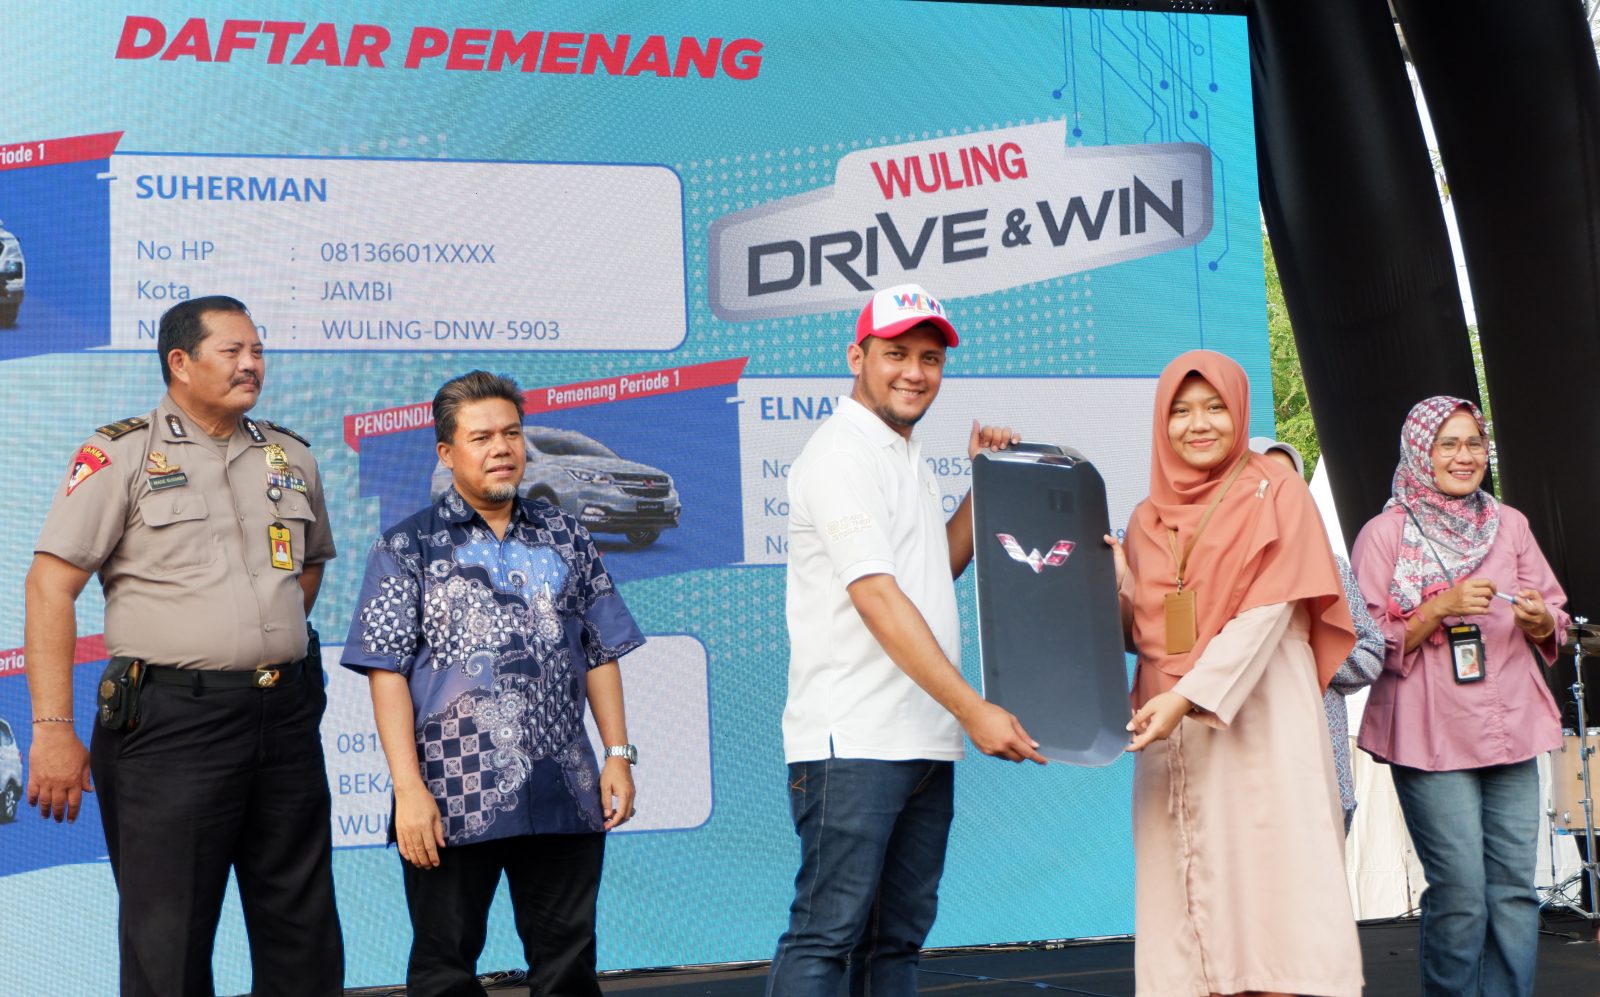 Image Winners of Wuling Drive & Win First Period Announced